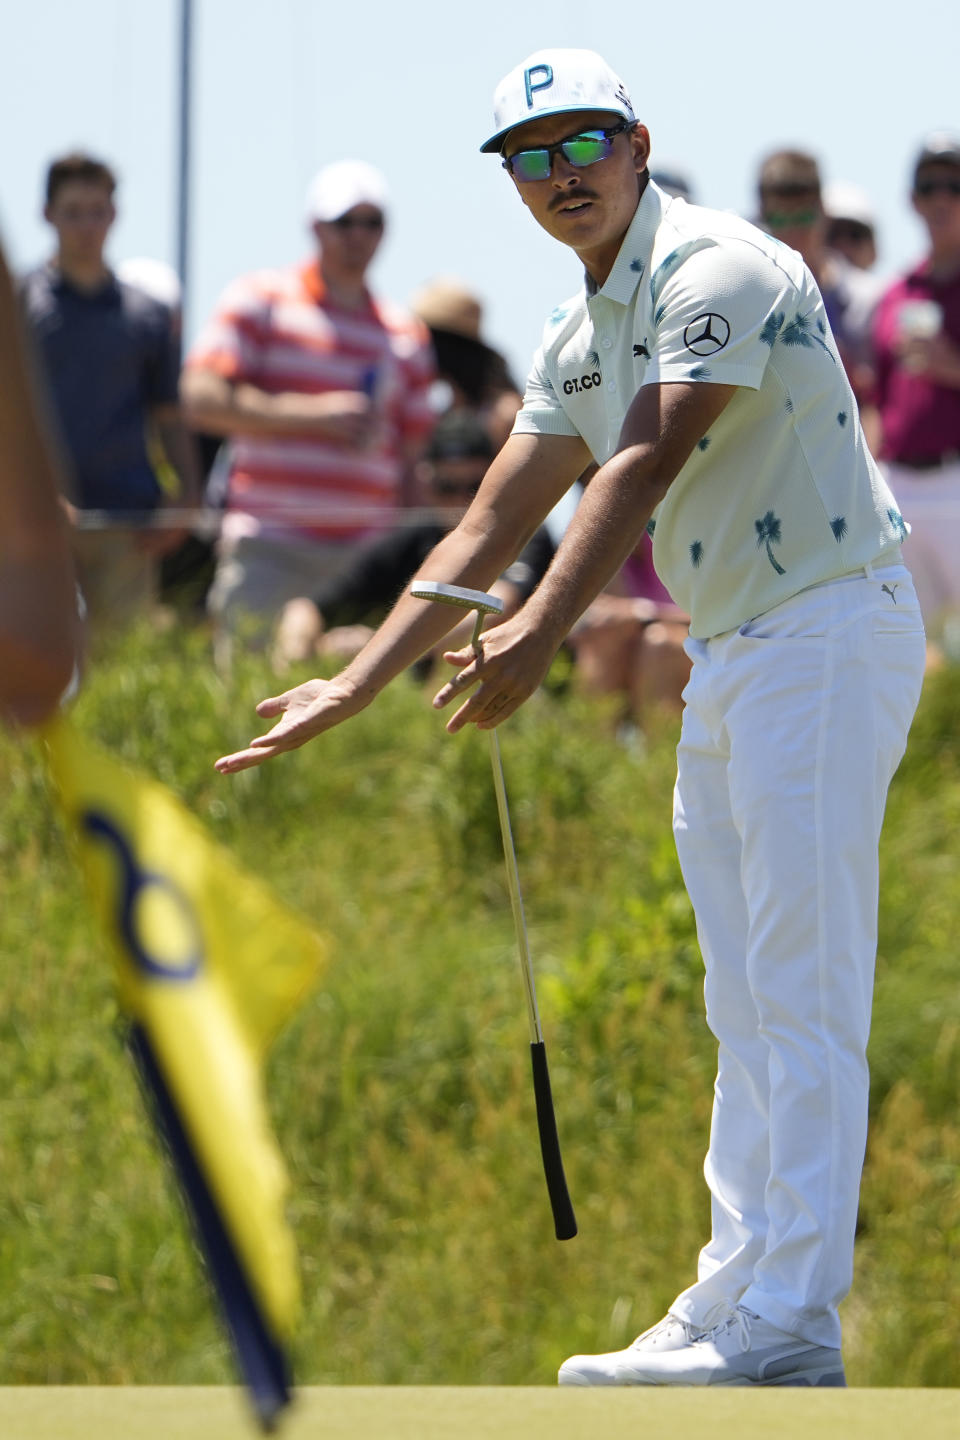 Rickie Fowler reacts as he misses a birdie putt on the eighth hole during the first round of the PGA Championship golf tournament on the Ocean Course Thursday, May 20, 2021, in Kiawah Island, S.C. (AP Photo/David J. Phillip)